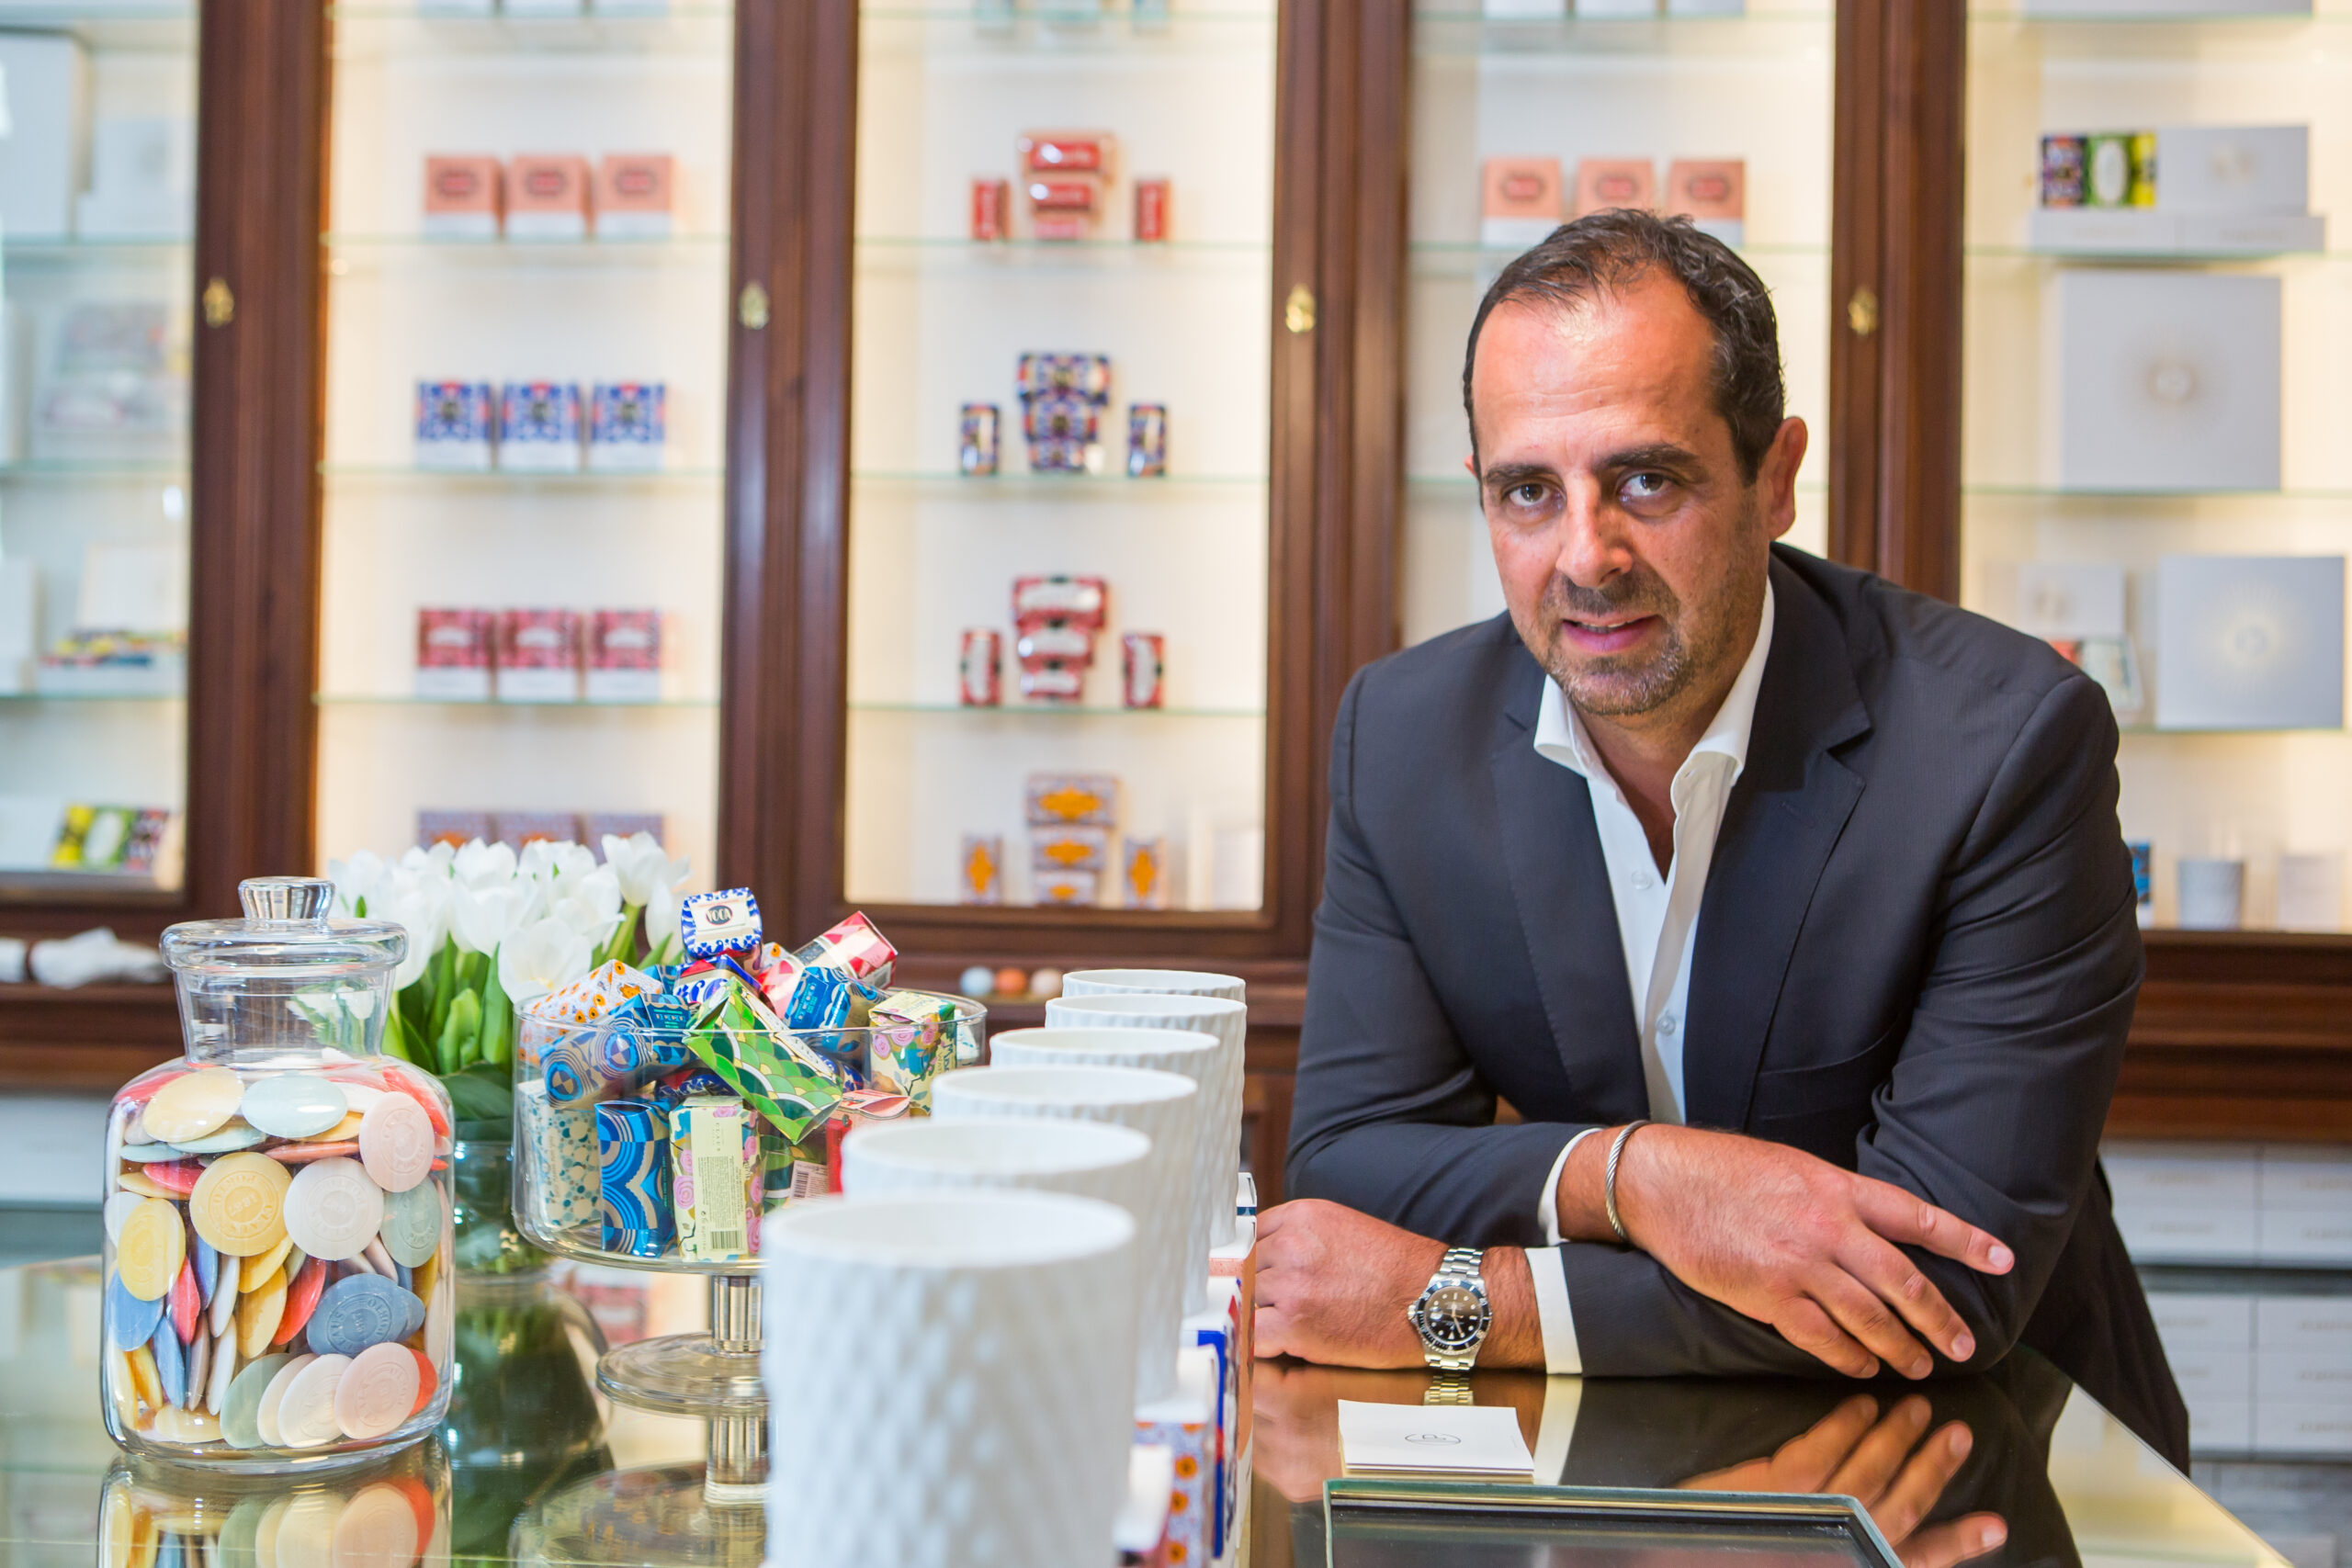 Portrait of Aquiles de Brito, owner and ceo of Claus Porto, a company creating hand crafted soap.